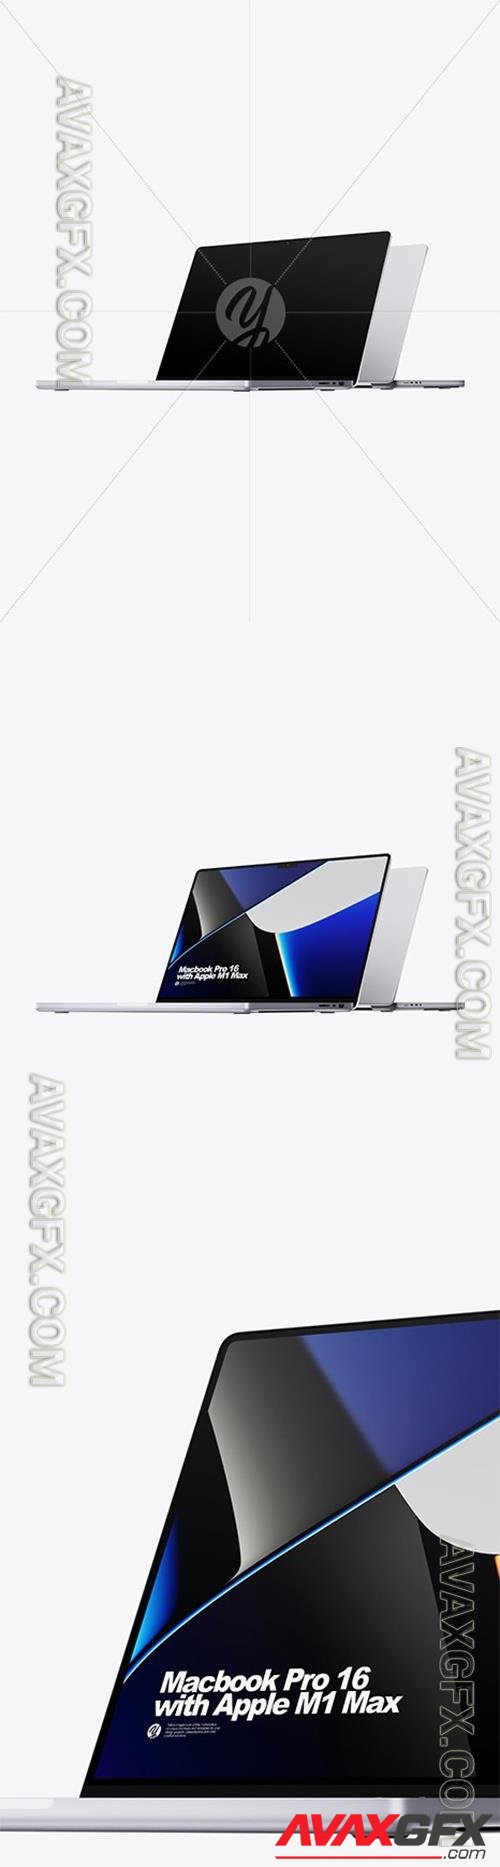 Two Macbook Pro 16 with Apple M1 Max 92677 TIF